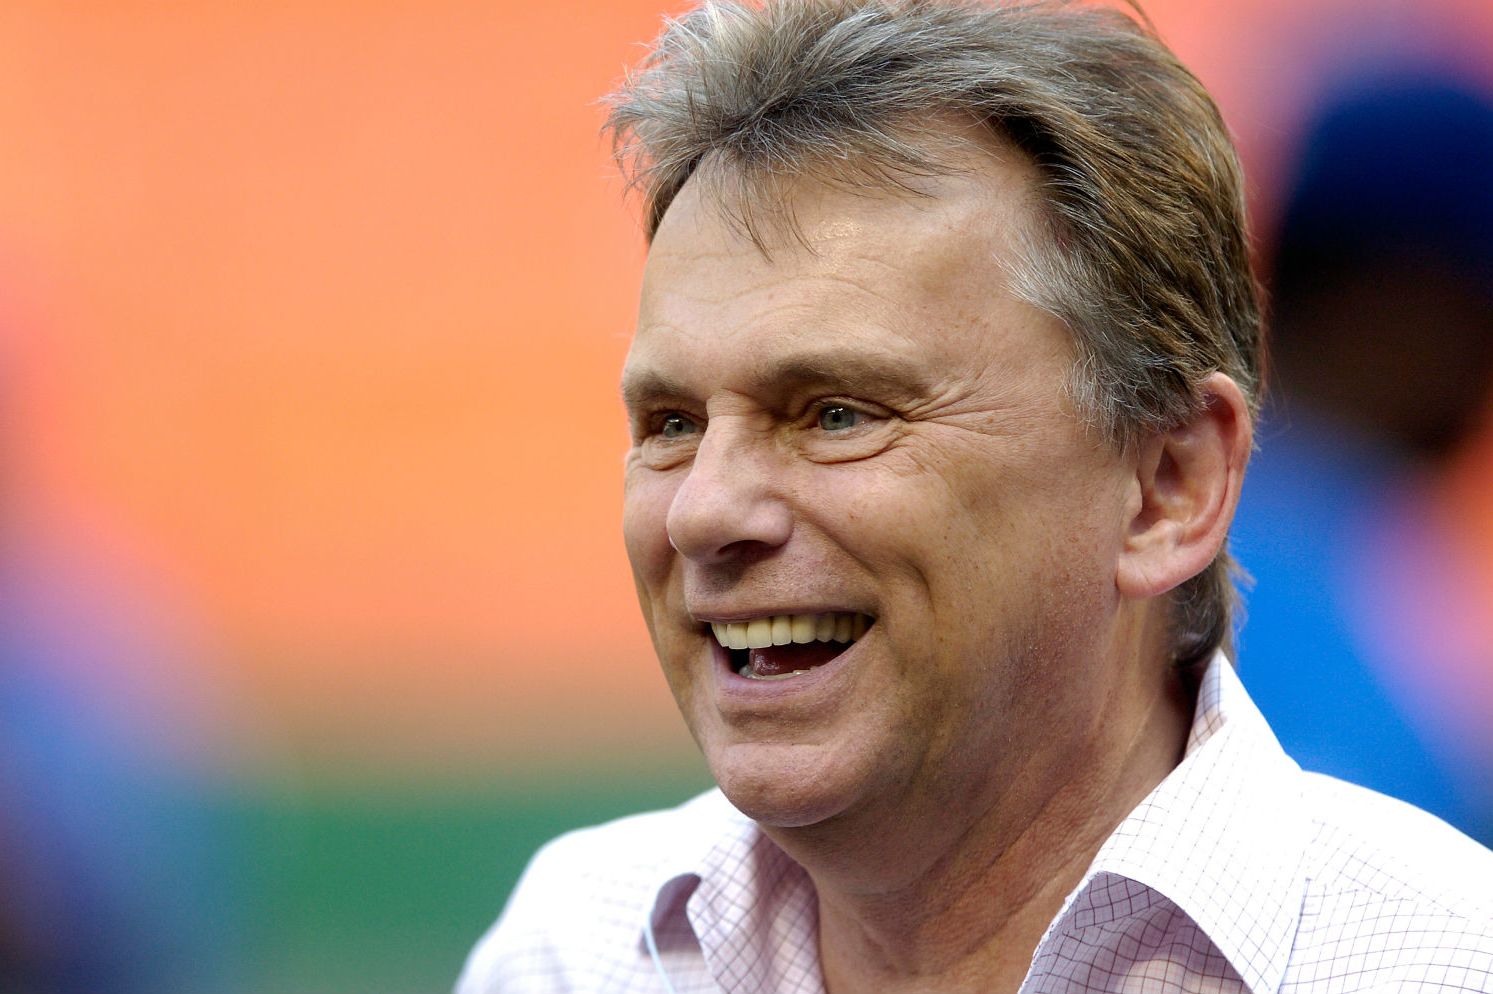 If You Get Over 80% On This Random Knowledge Quiz, You Know a Lot Pat Sajak